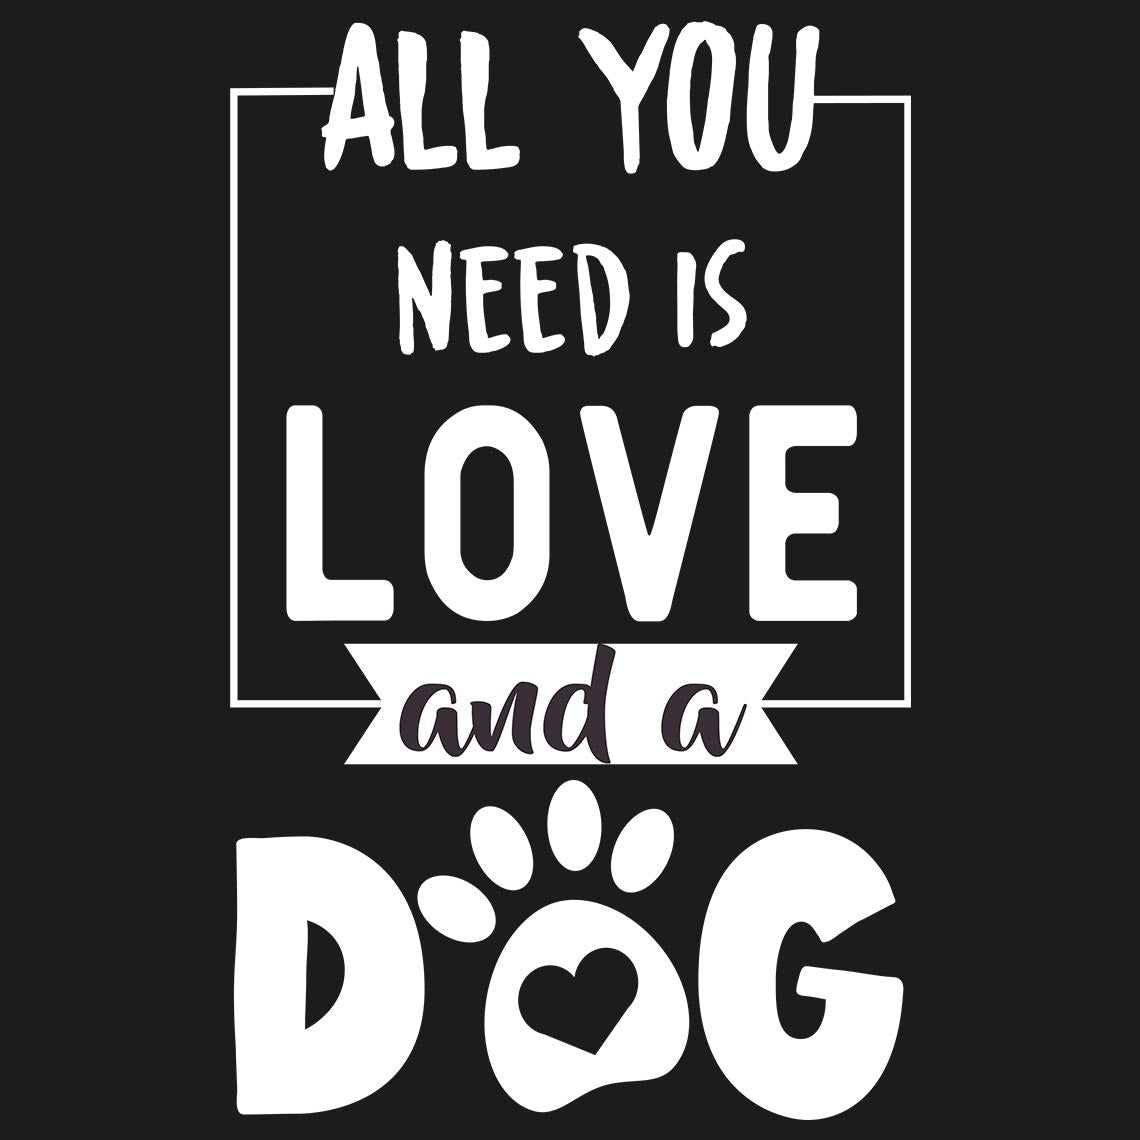 All You Need Is Love & Dog - Soul & Peace